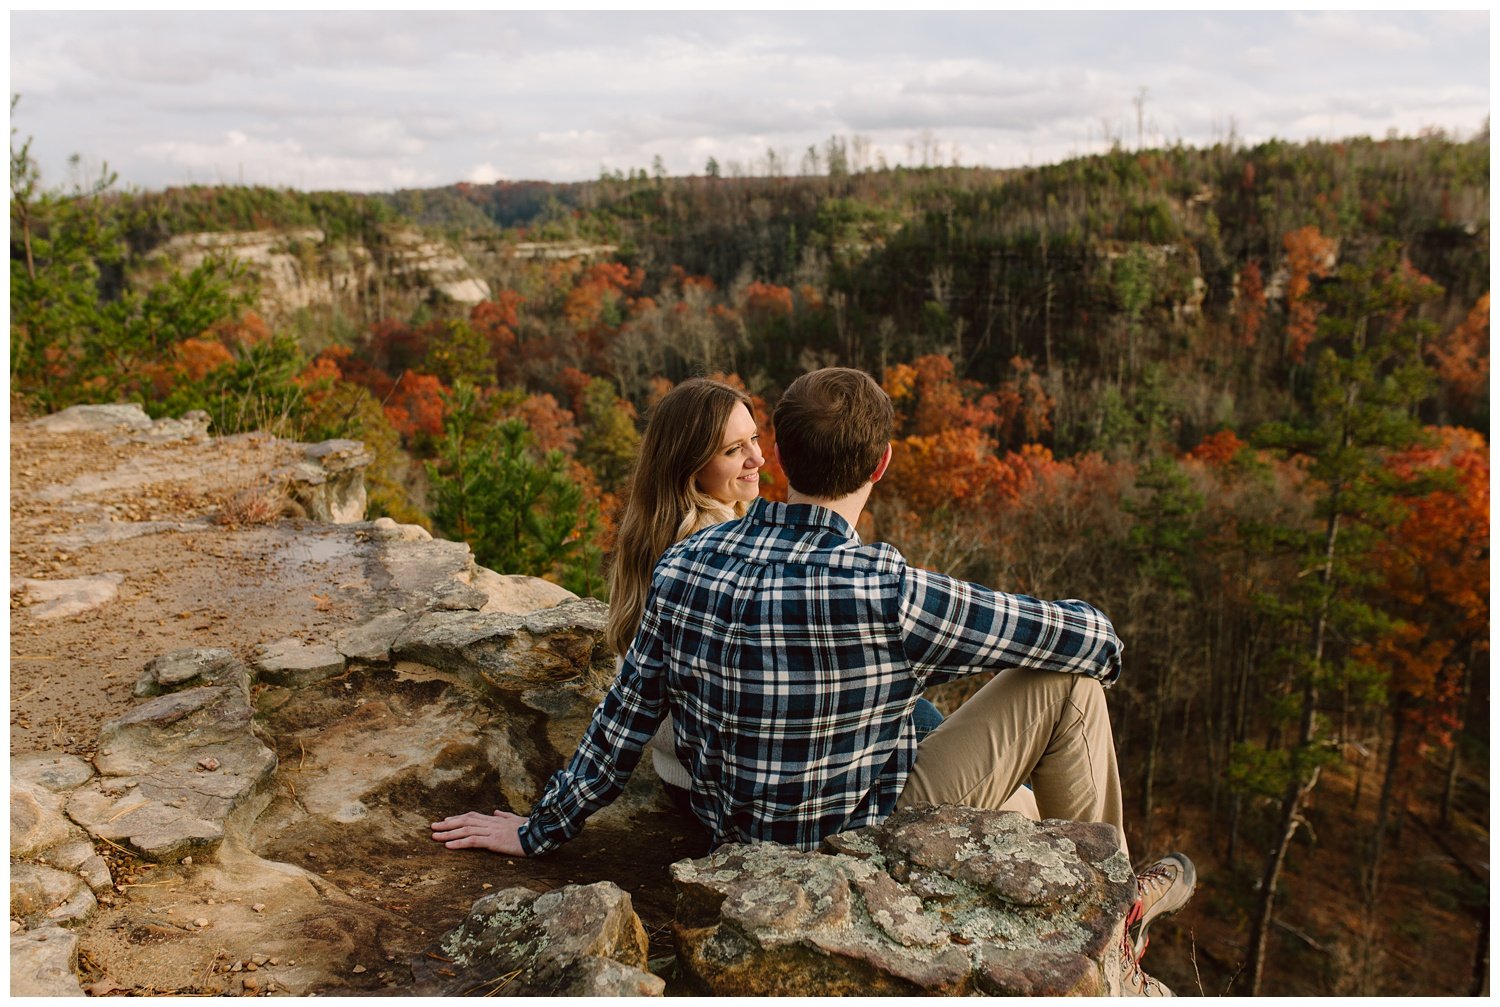 kendra_Farris_photography_red_river_gorge_photographer_proposal_engagement_elopement-56.jpg